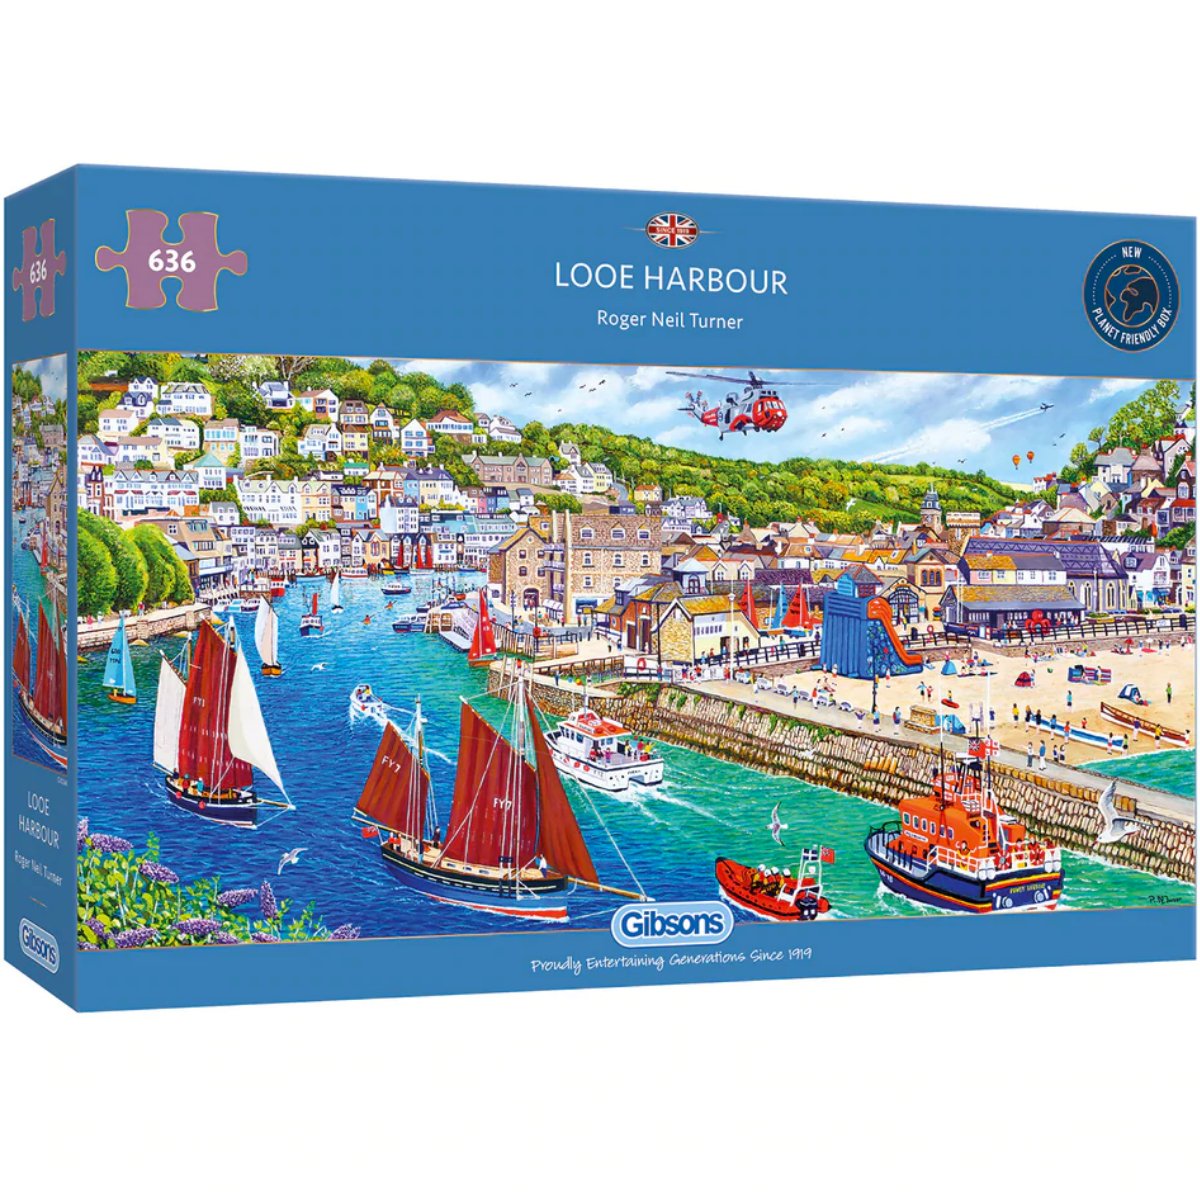 Gibsons Looe Harbour Jigsaw Puzzle (636 Pieces) - Phillips Hobbies